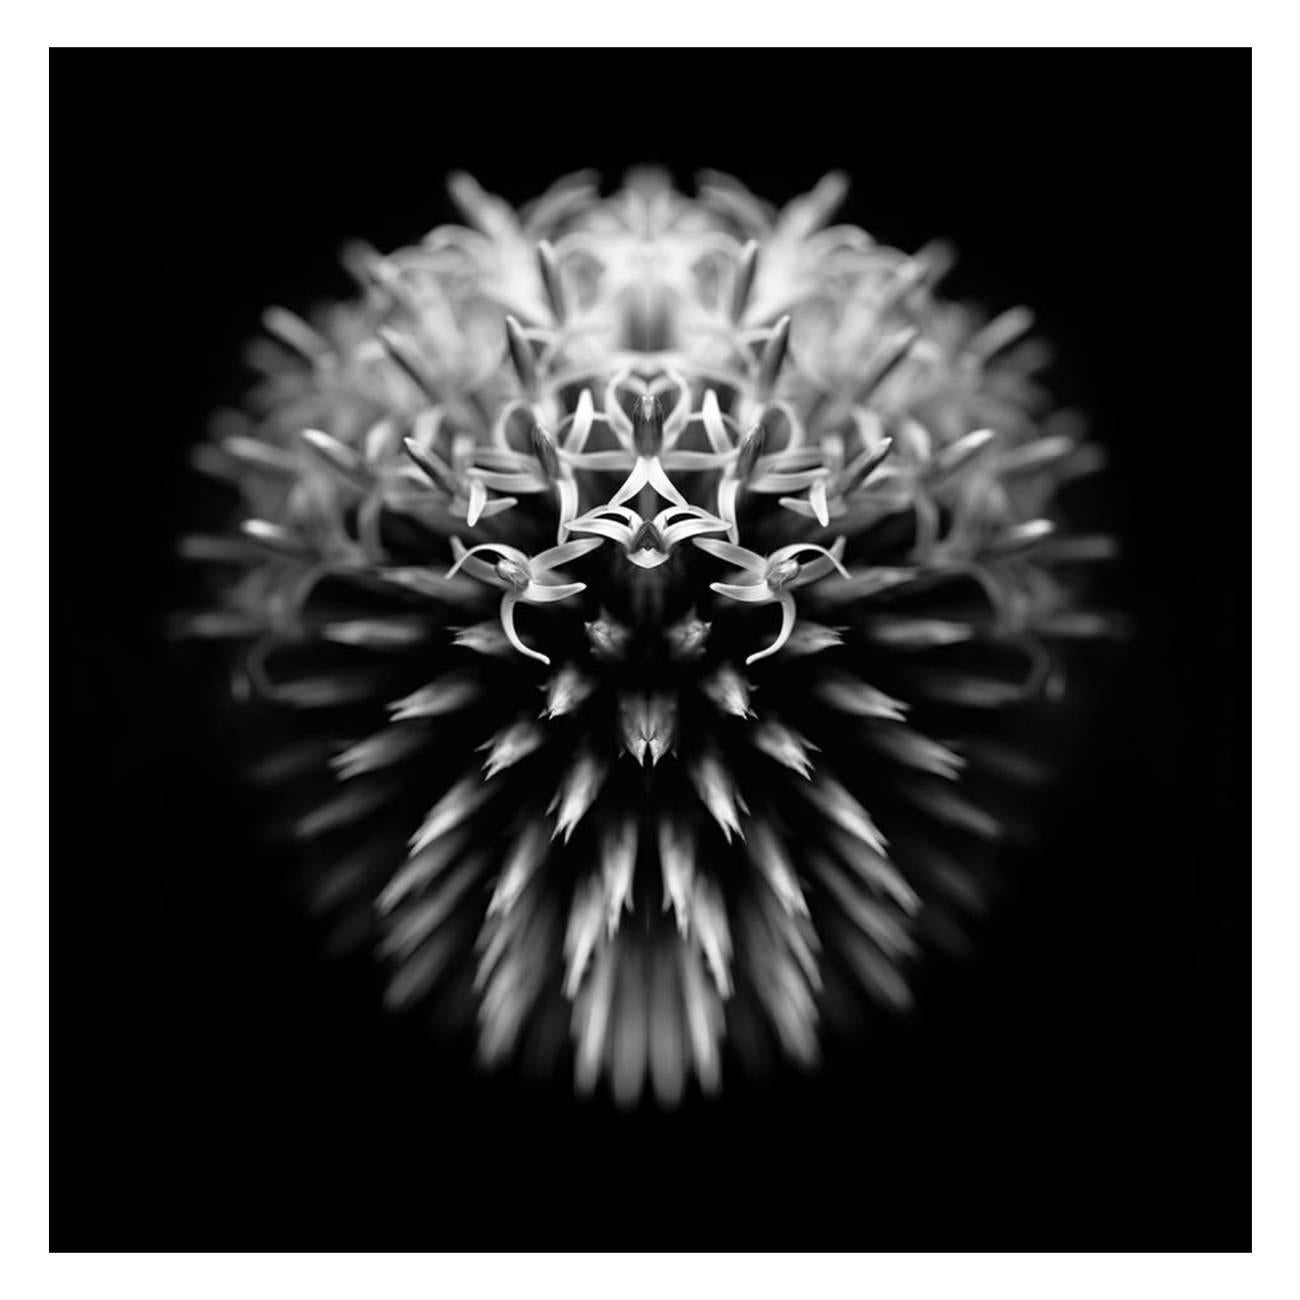 Echninopsis - Abstract Photography  - Black Black and White Photograph by Oliver Barnett